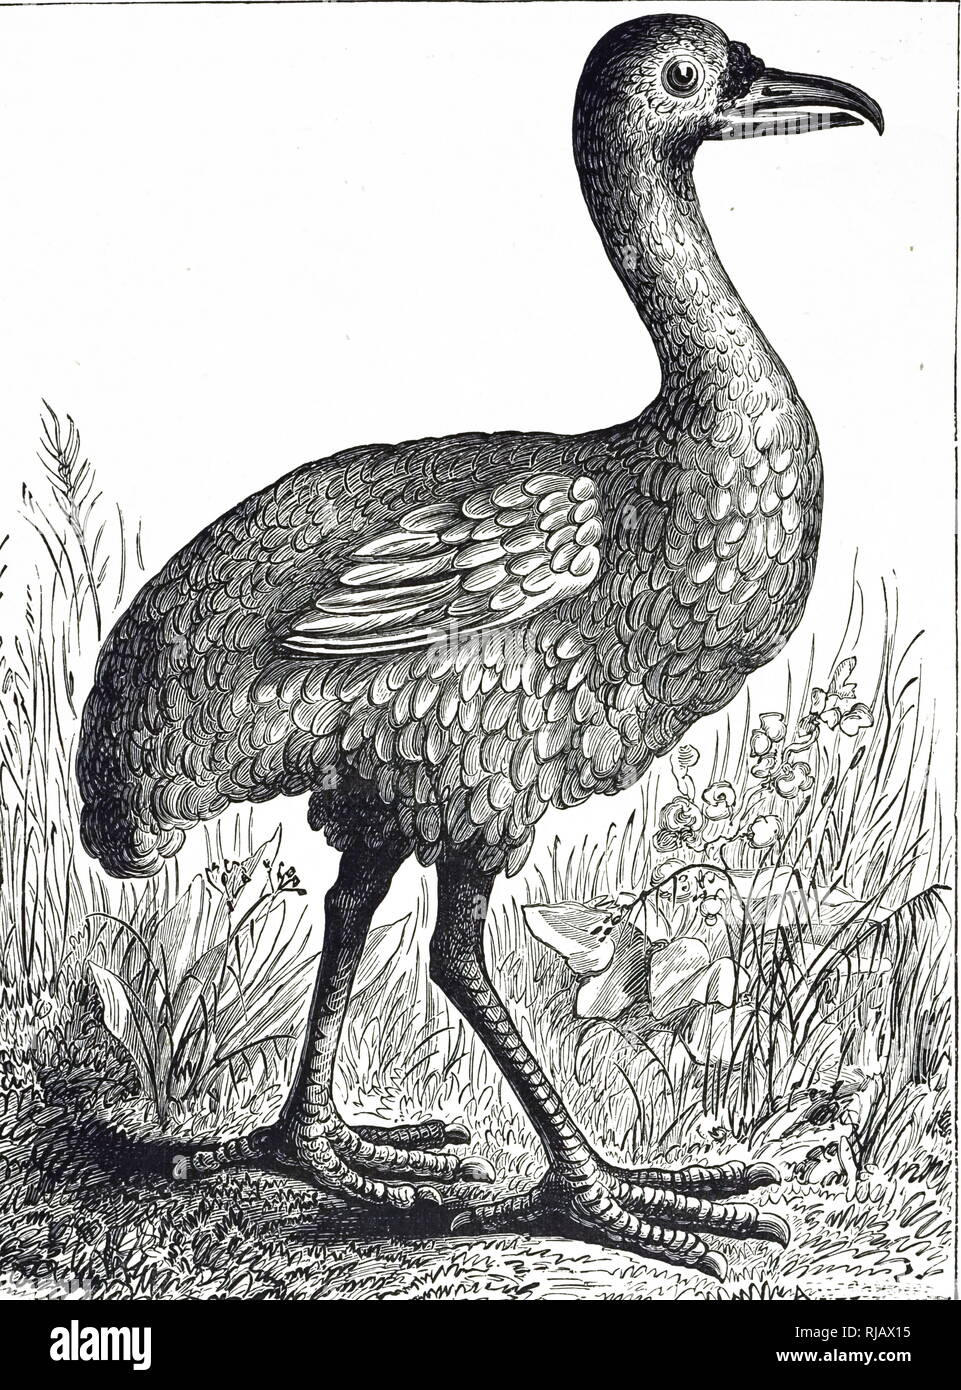 An engraving depicting a Rodrigues solitaire an extinct, flightless bird that was endemic to the island of Rodrigues, east of Madagascar in the Indian Ocean. Dated 19th century Stock Photo